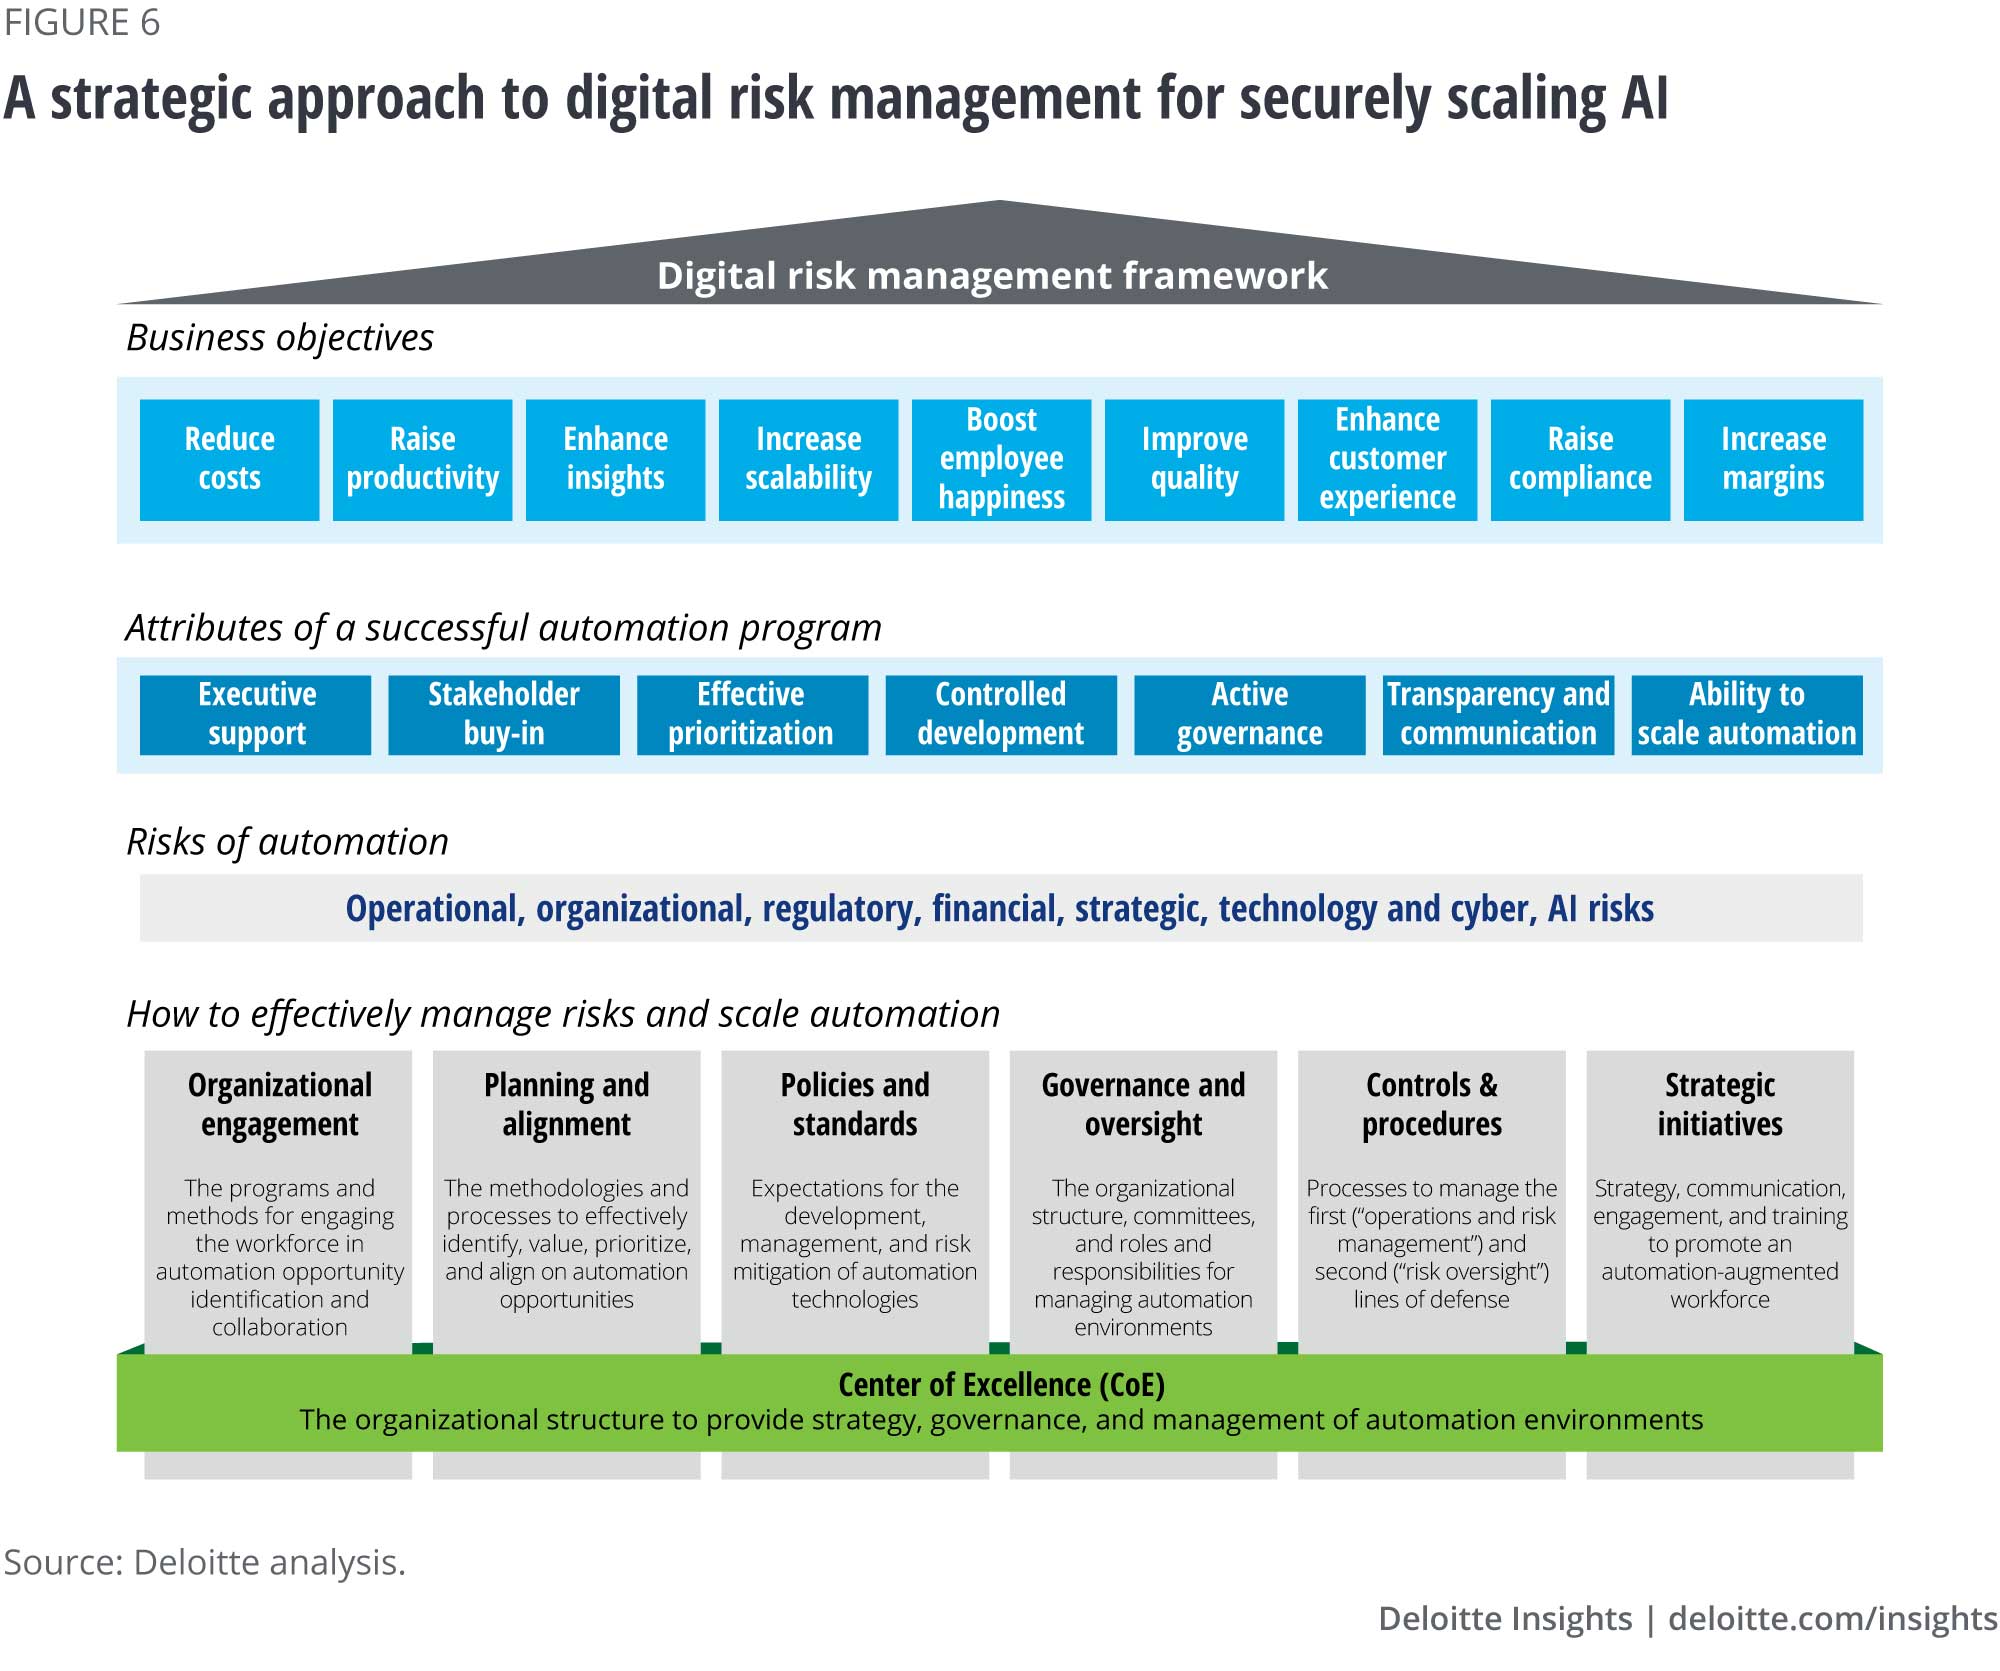 A strategic approach to digital risk management for securely scaling AI